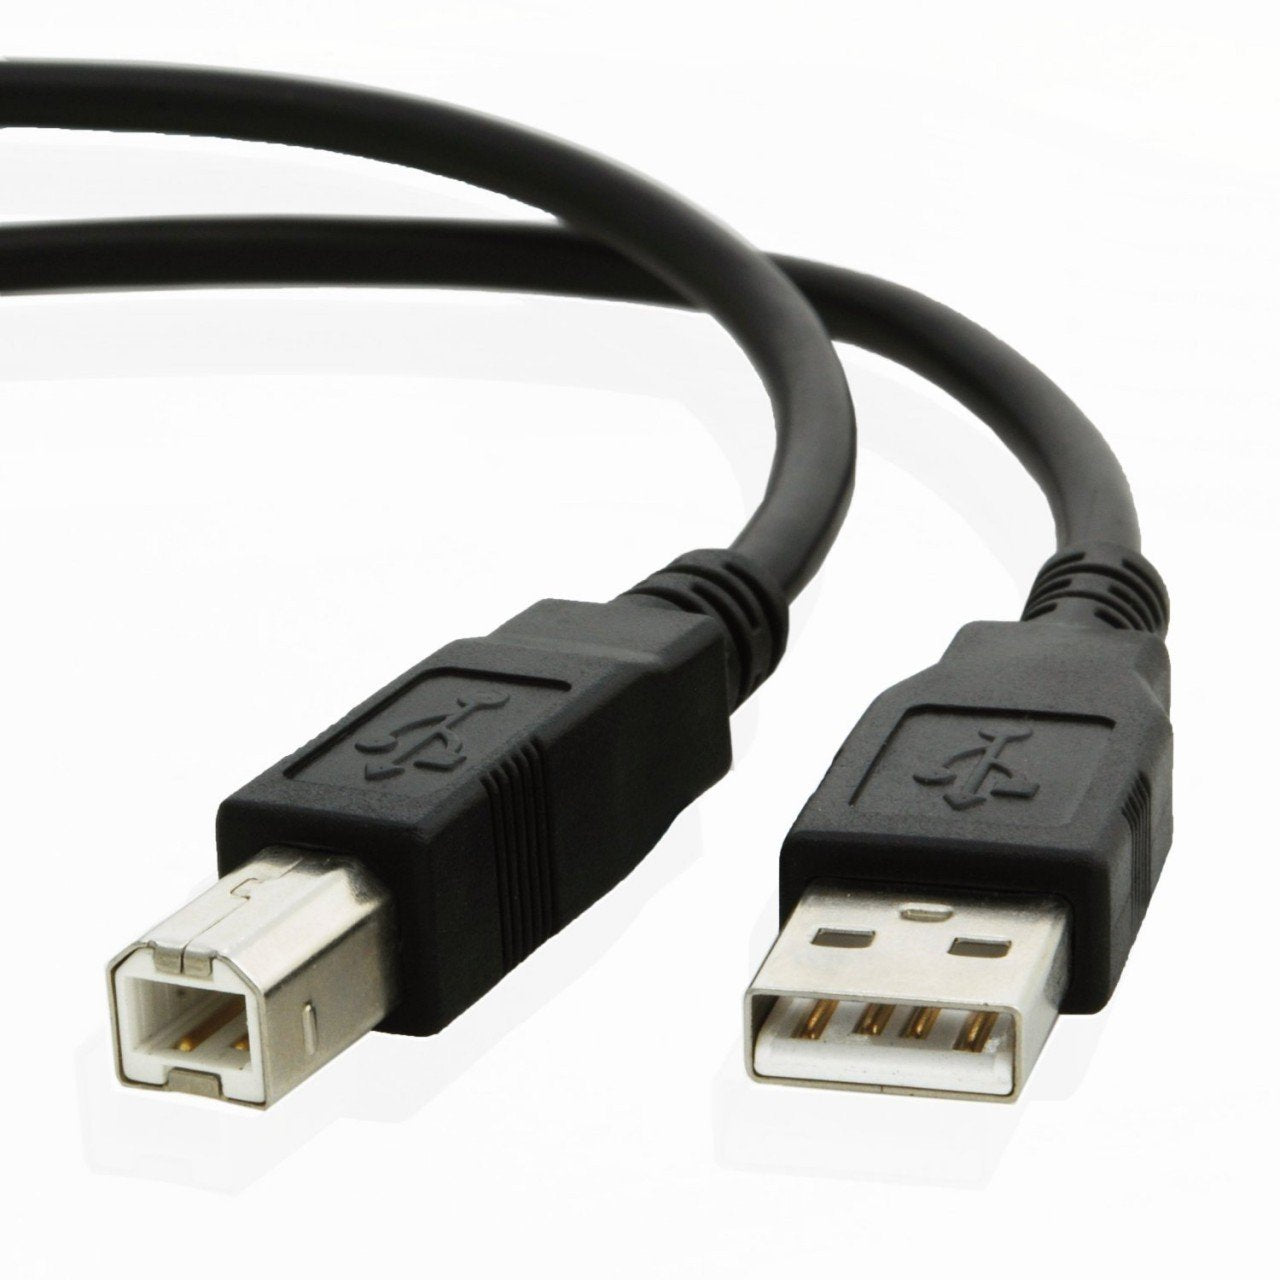 USB cable for Canon PIXMA MG2500